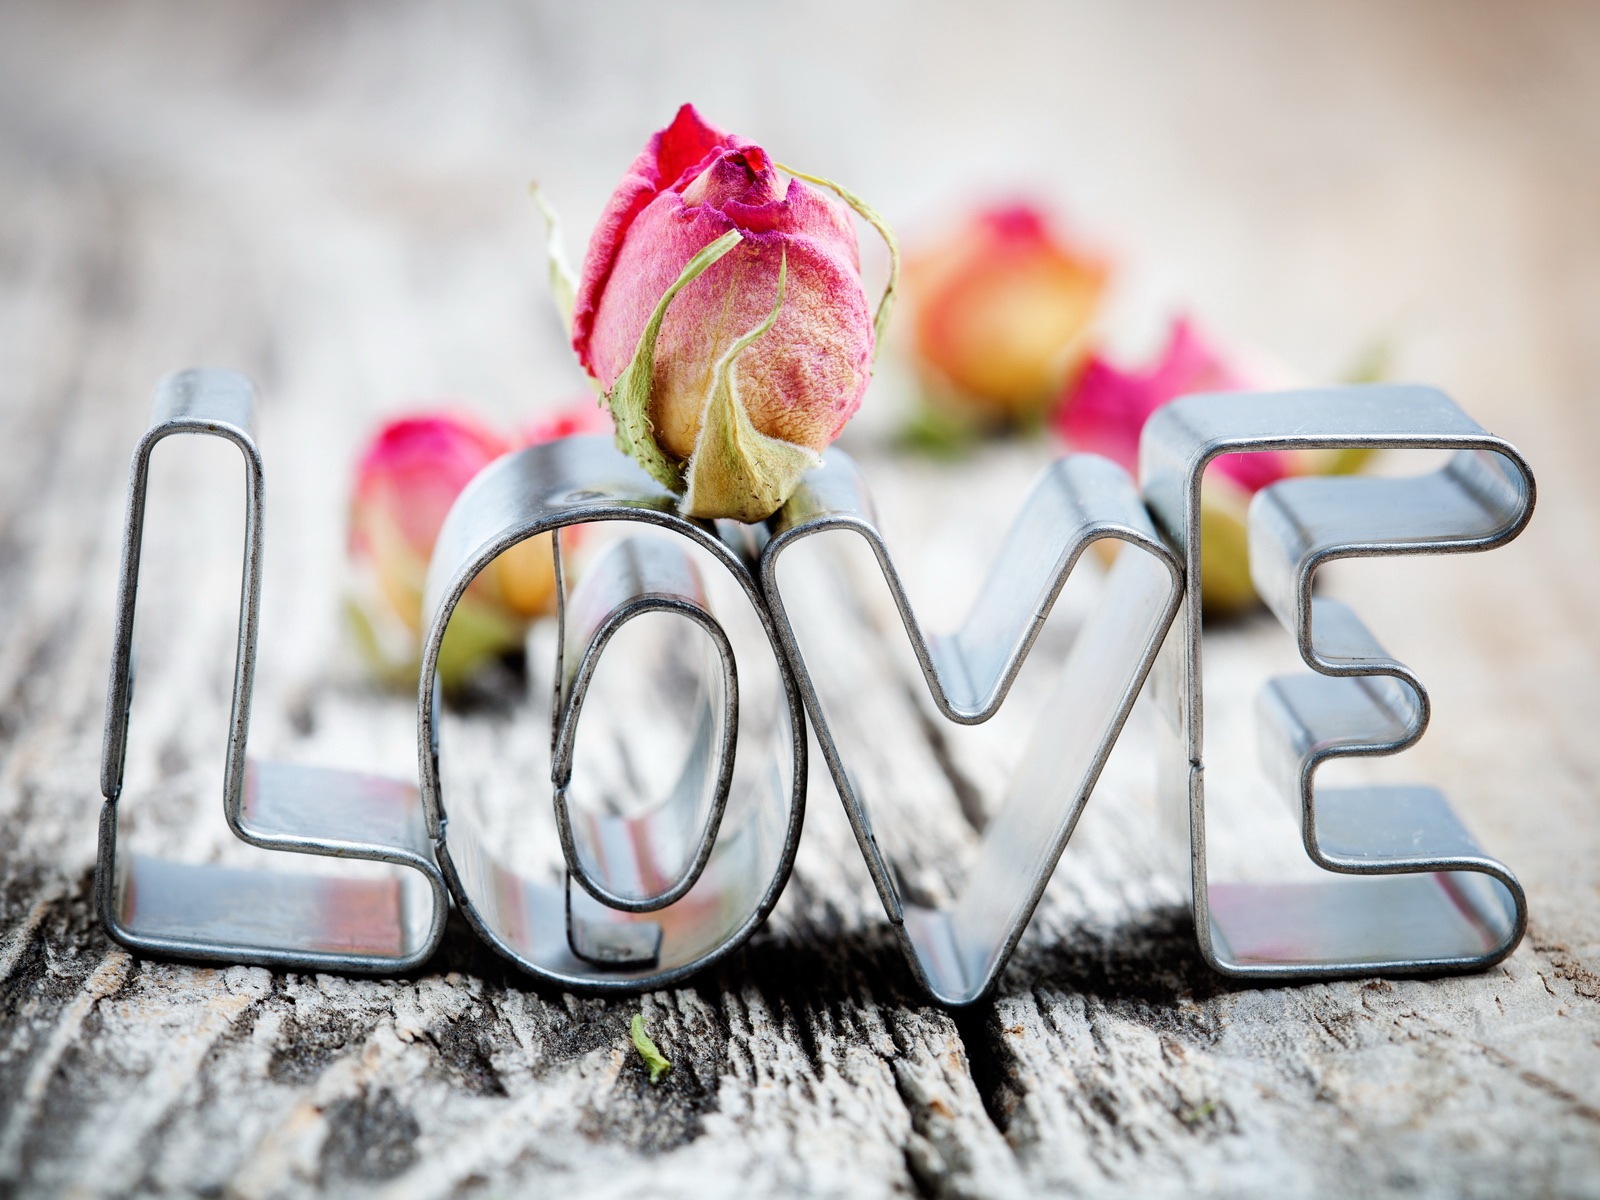 Warm and romantic Valentine's Day HD wallpapers #1 - 1600x1200